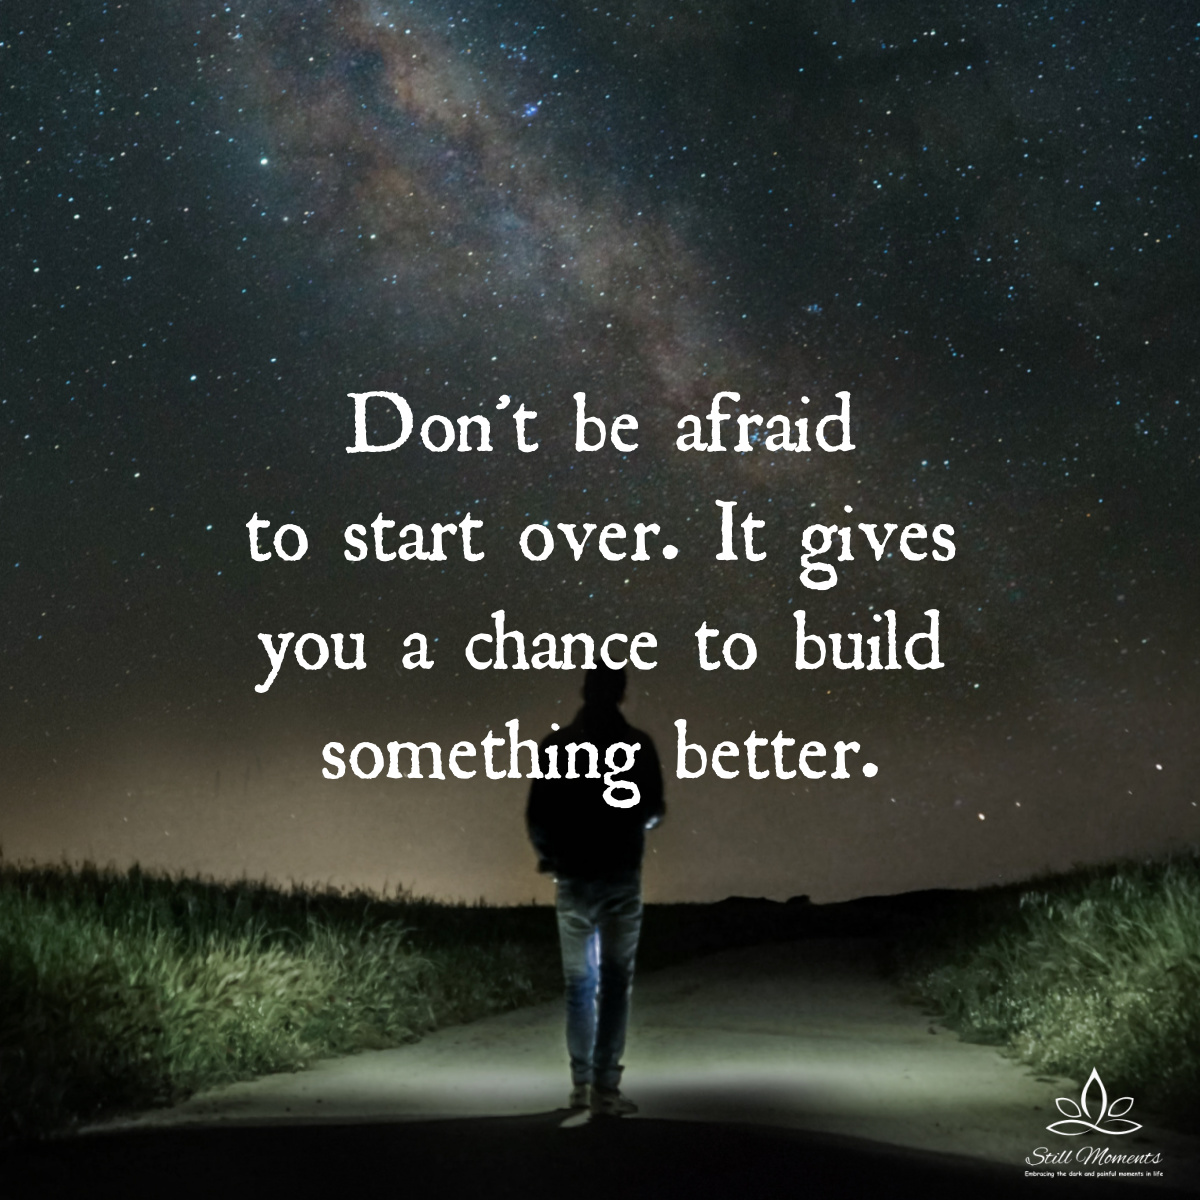 Don’t Be Afraid to Start Over - Still Moments